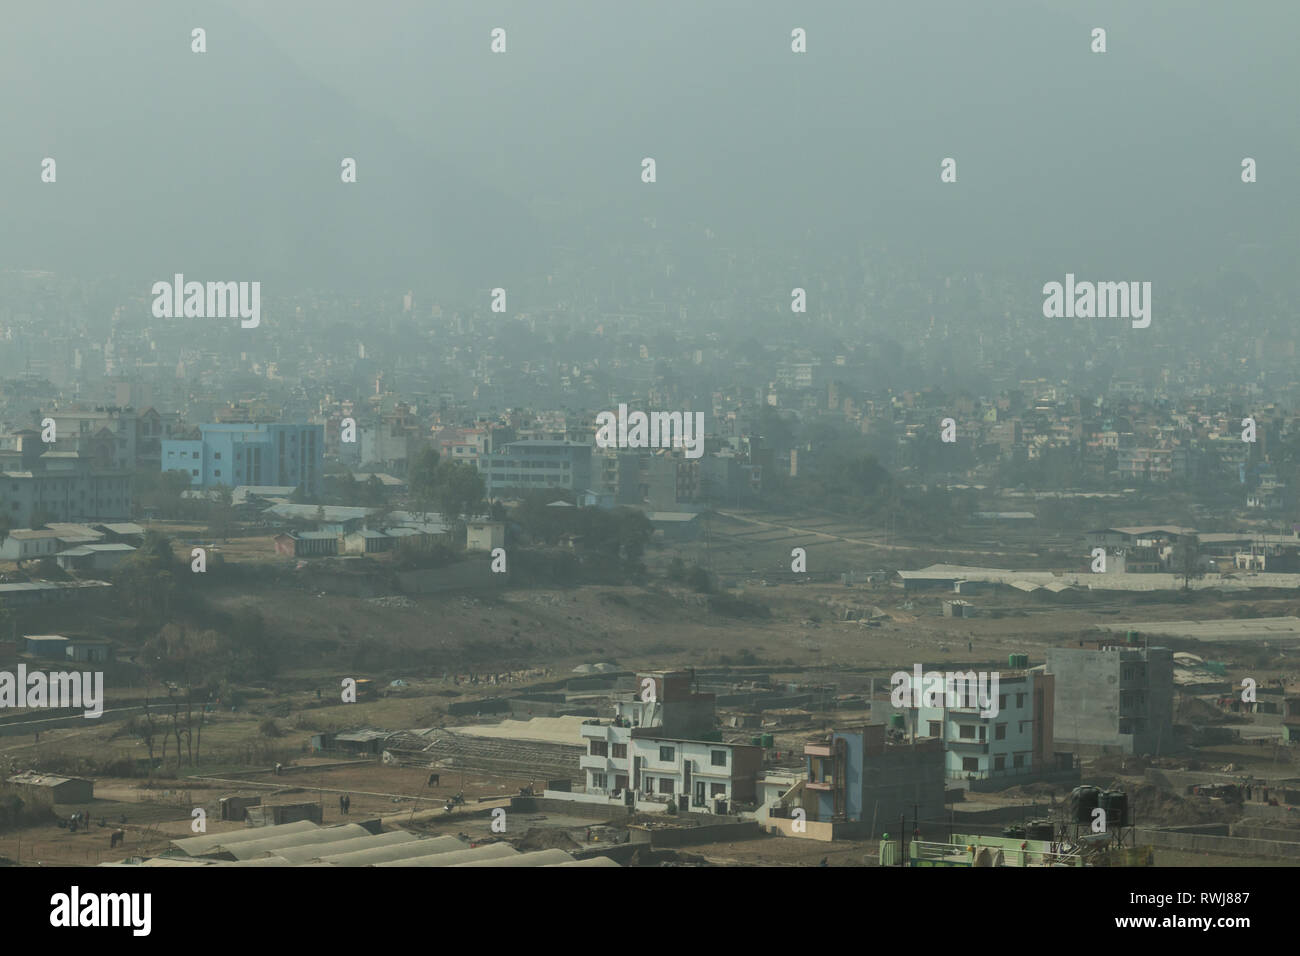 Heavy pollution and smog hang in the air over Kathmandu valley, Nepal, causing health concerns for locals and tourists alike. Stock Photo